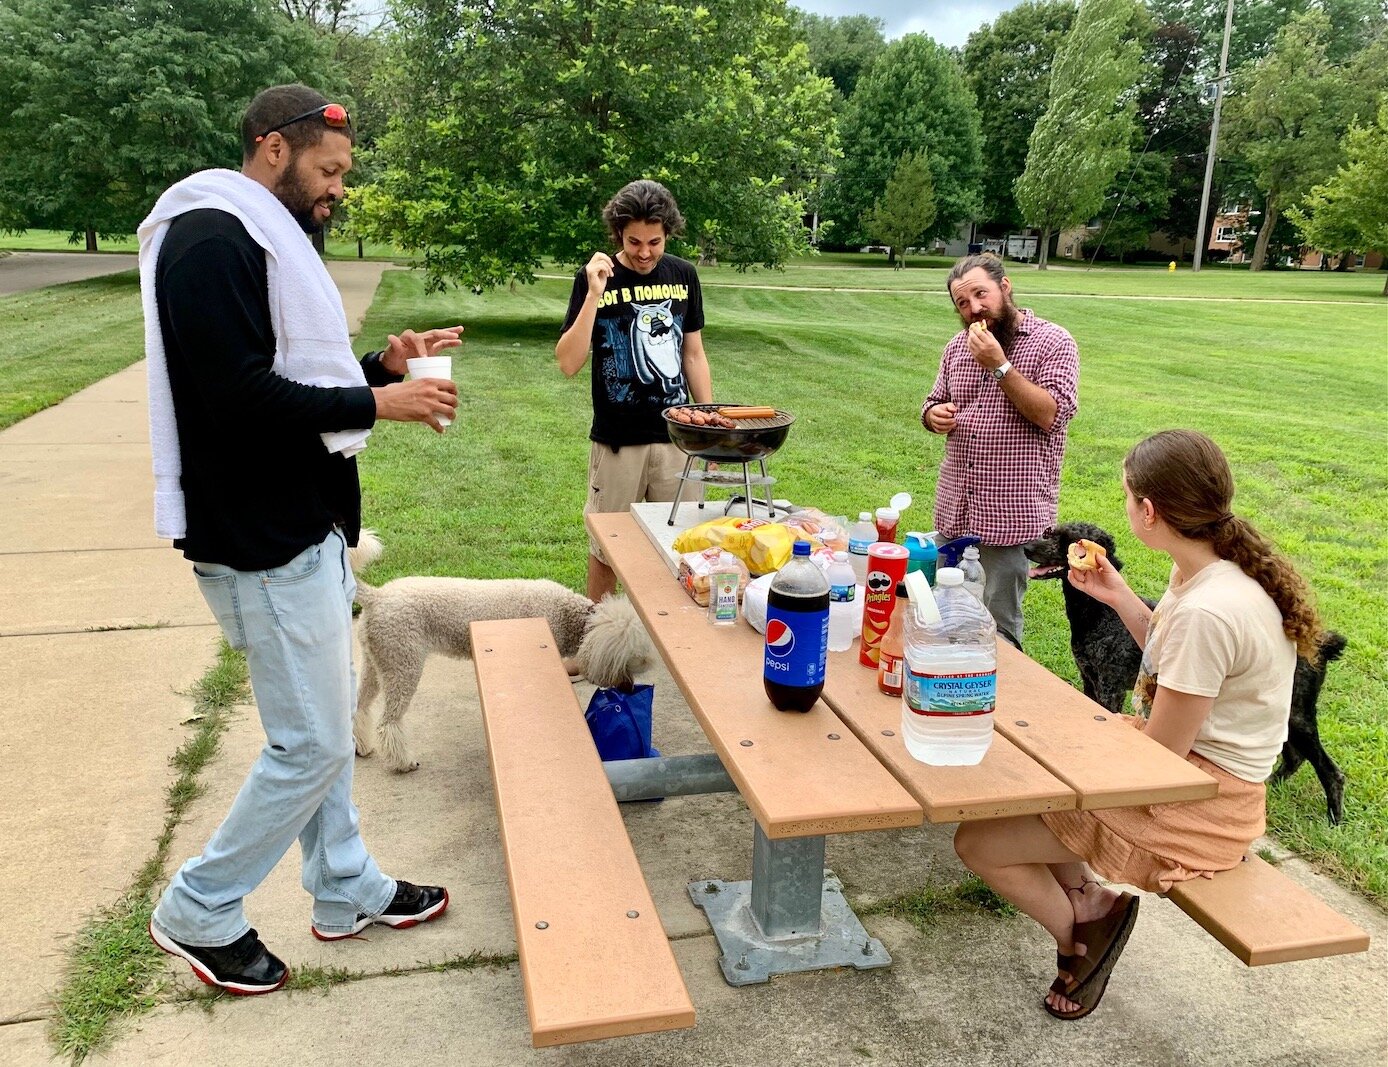 Dog lovers congregate on Thursday evenings to grill hotdogs and socialize at the Fairmount Dog Park on Prairie Street in the West Douglas Neighborhood.